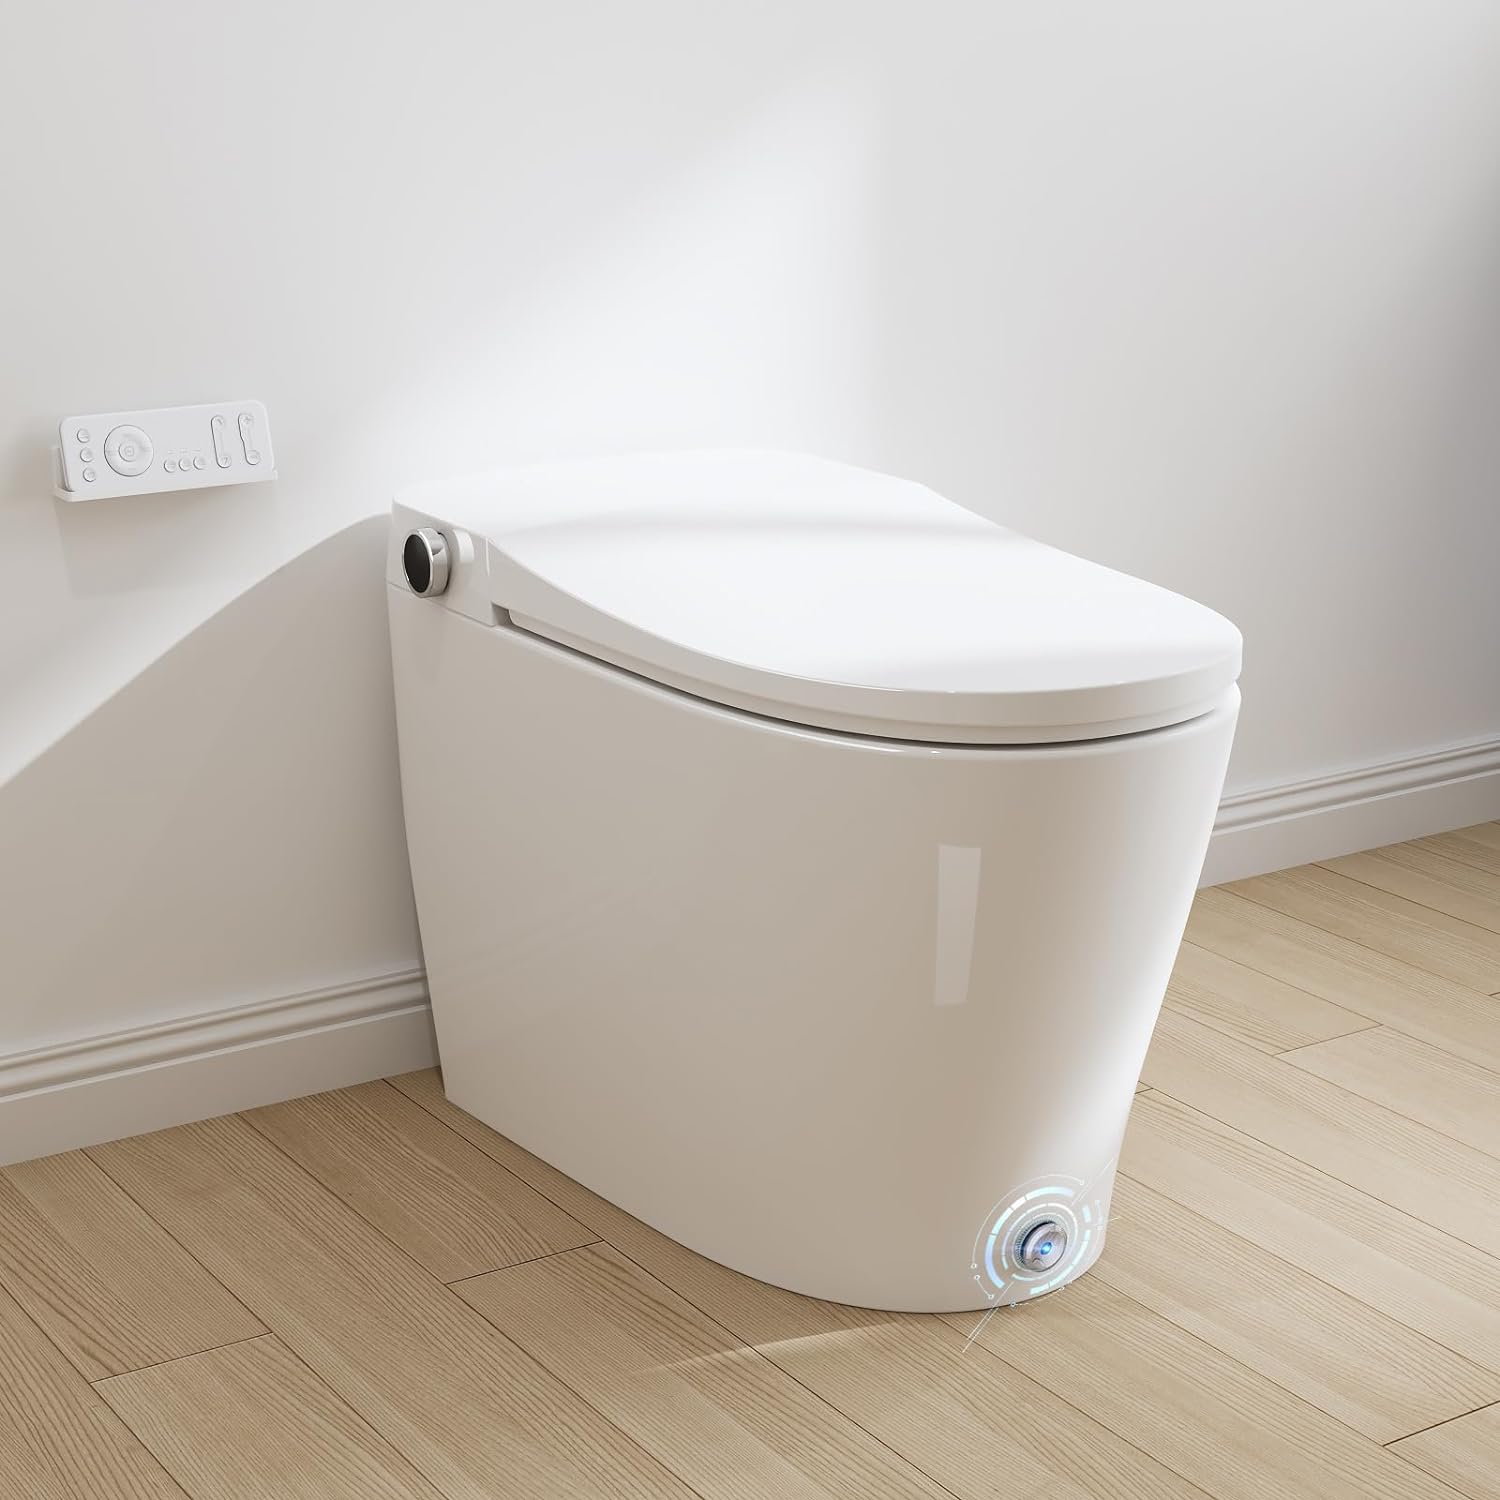 Smart Toilet, Upgraded and Modern with Bidet Built-in, Tankless Toilet with Automatic Powerful Flush, Auto Open/close Lid, Heated Bidet Seat, Instant Warm Water